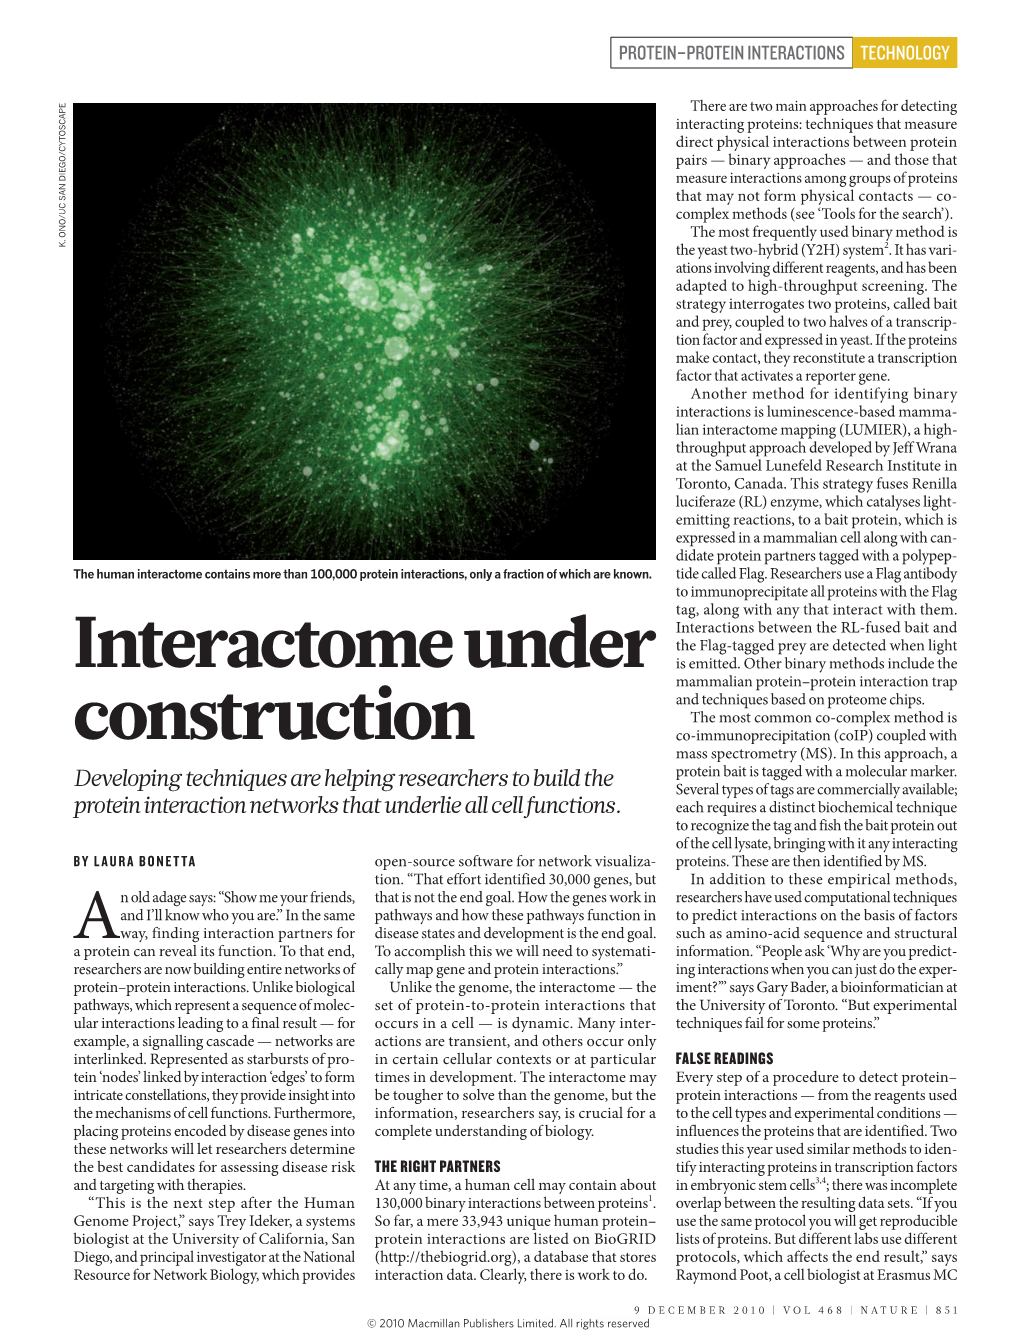 Interactome Under Construction